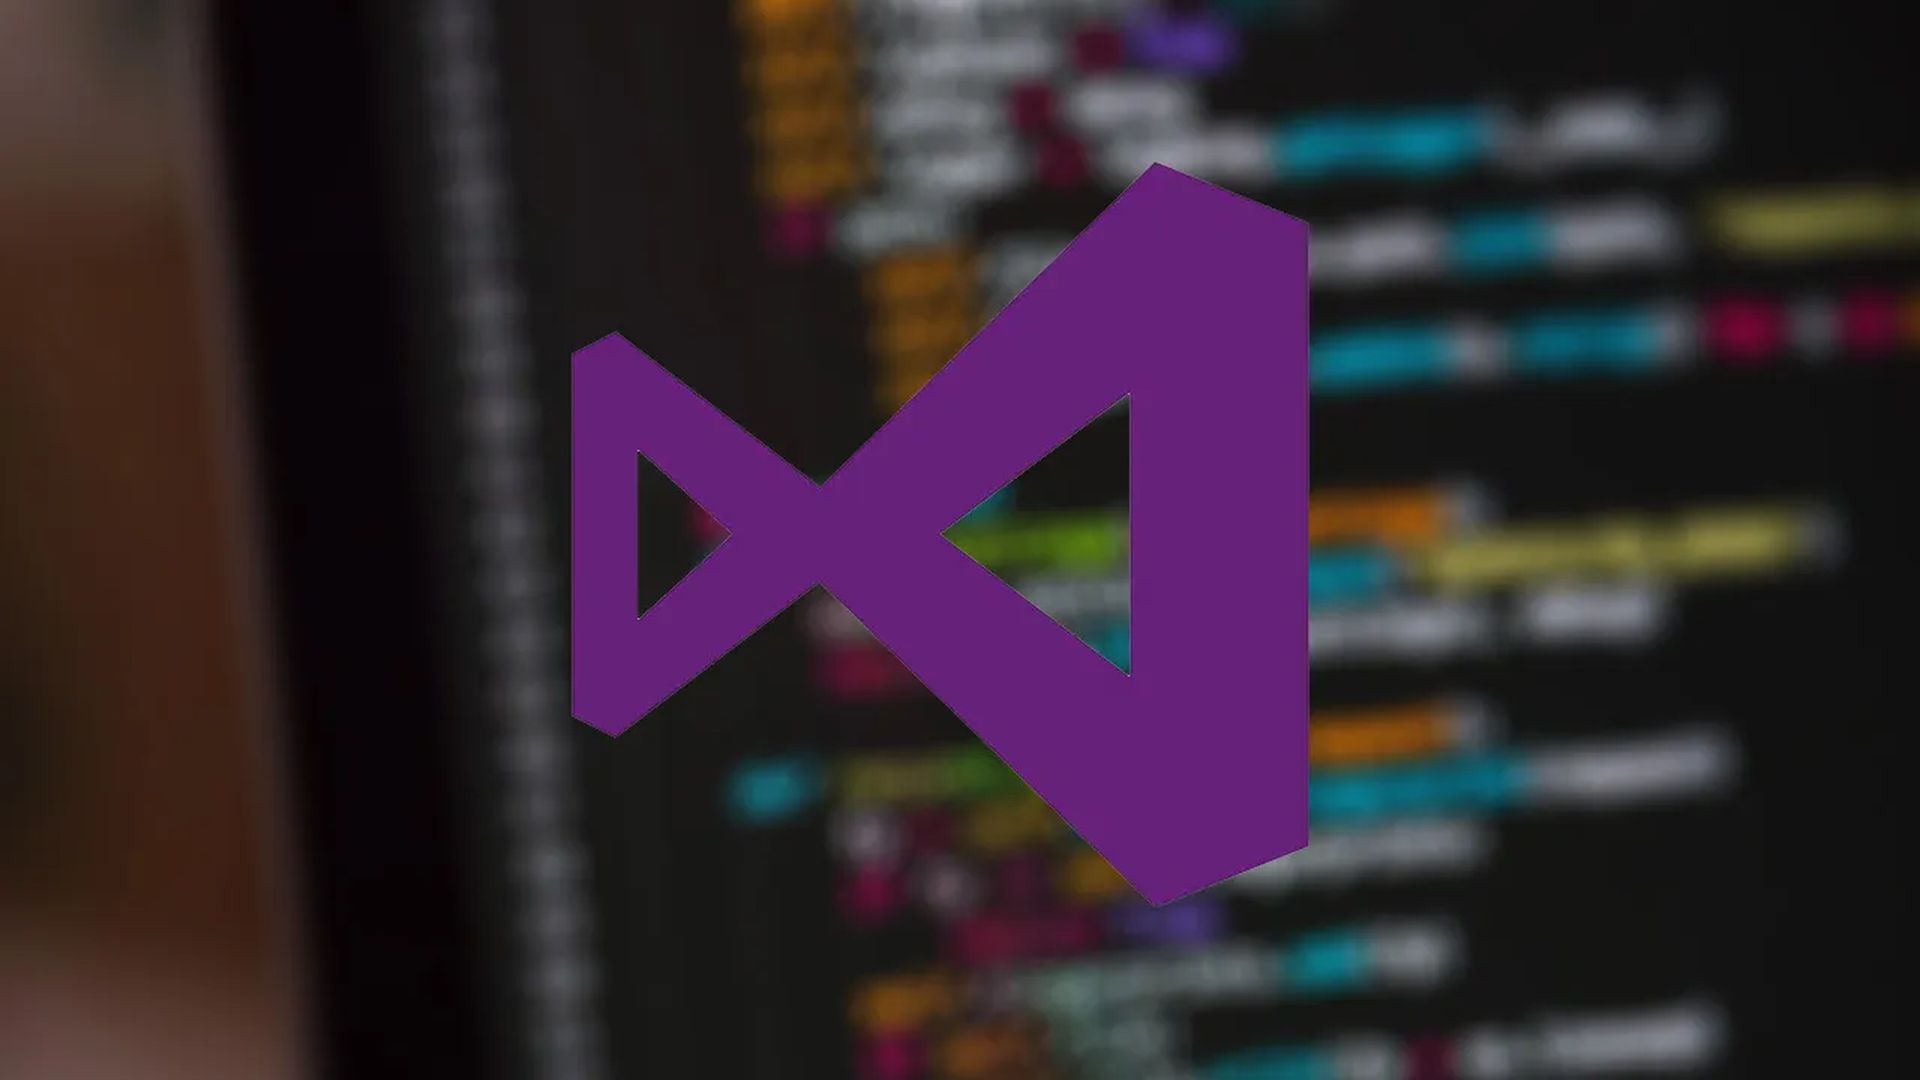 Visual Studio 2022 17.3 is out now